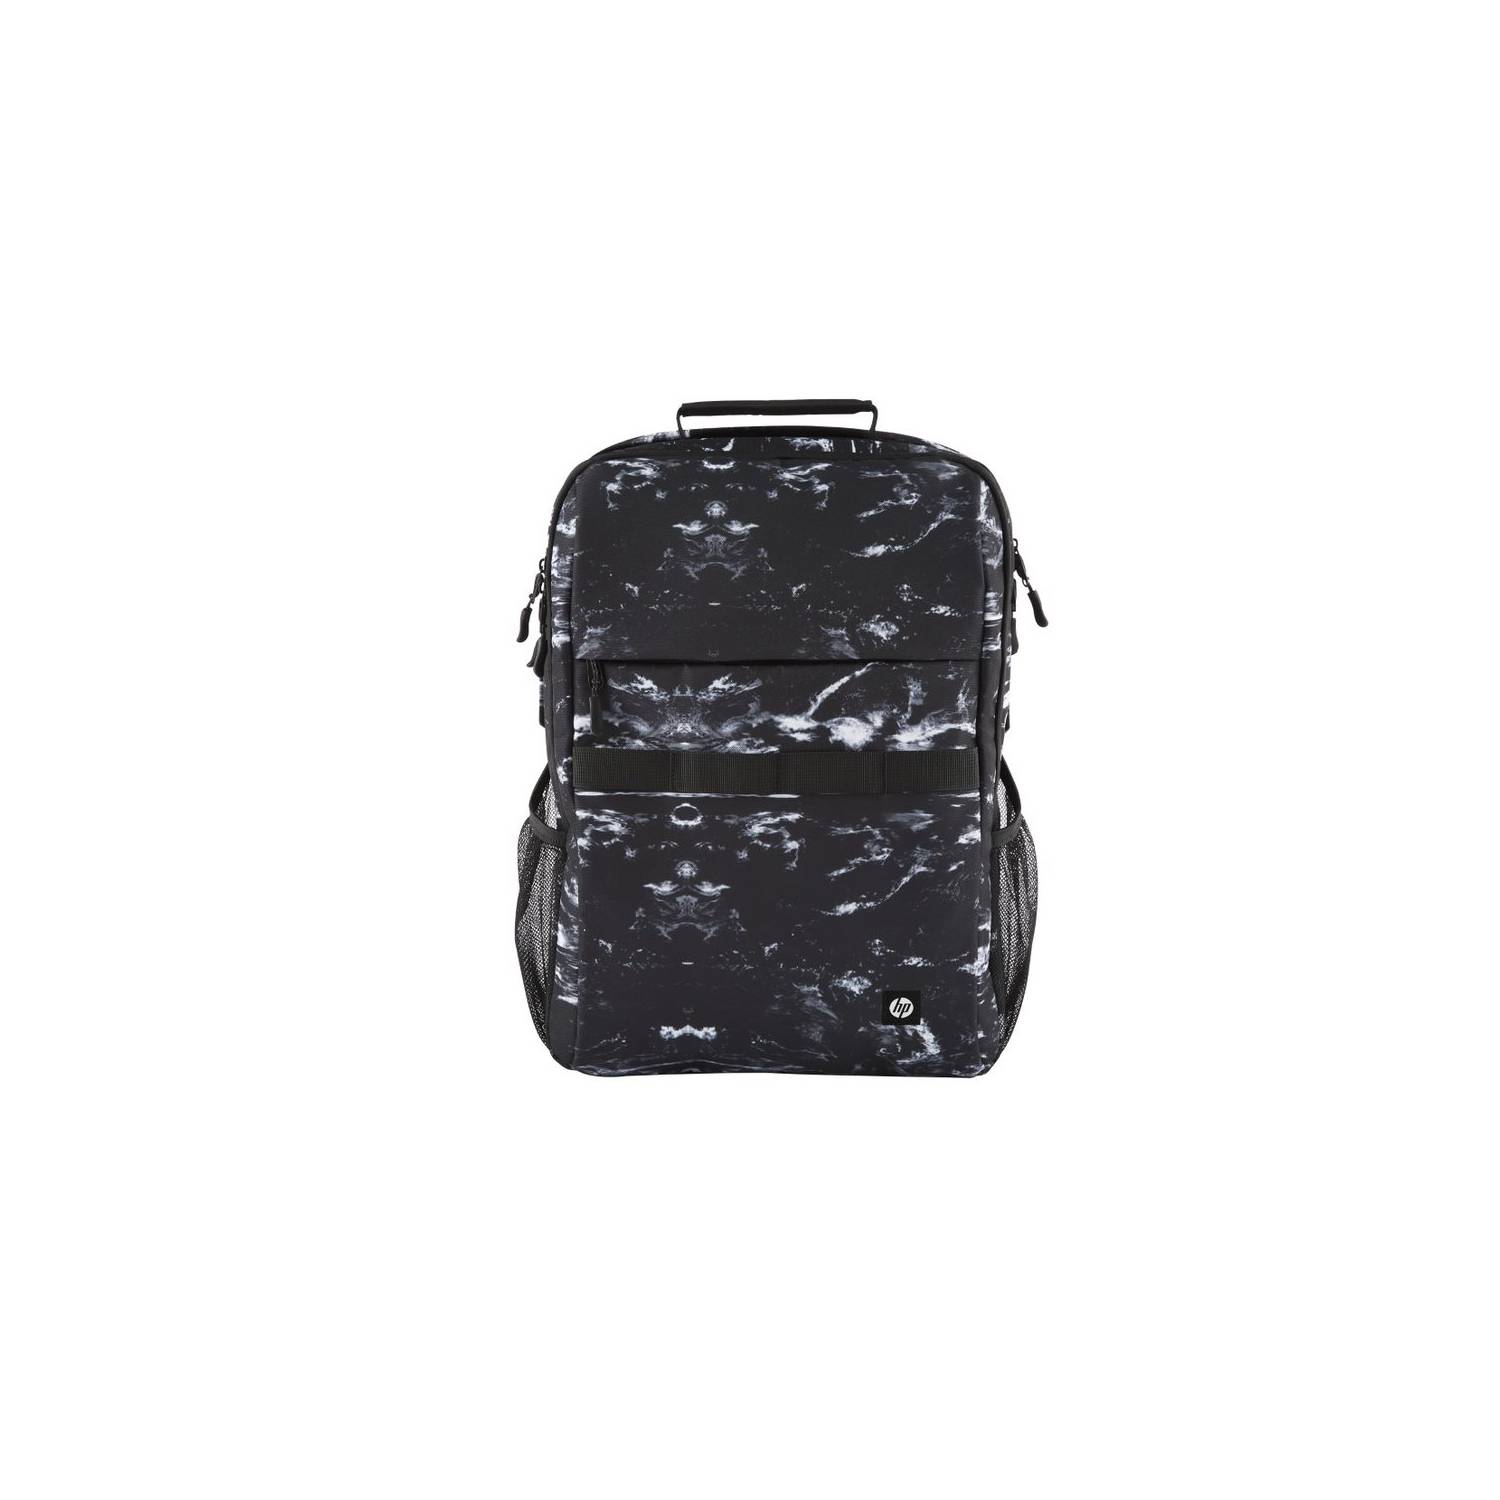 HP Mochila HP Campus Marble Stone XL Backpack